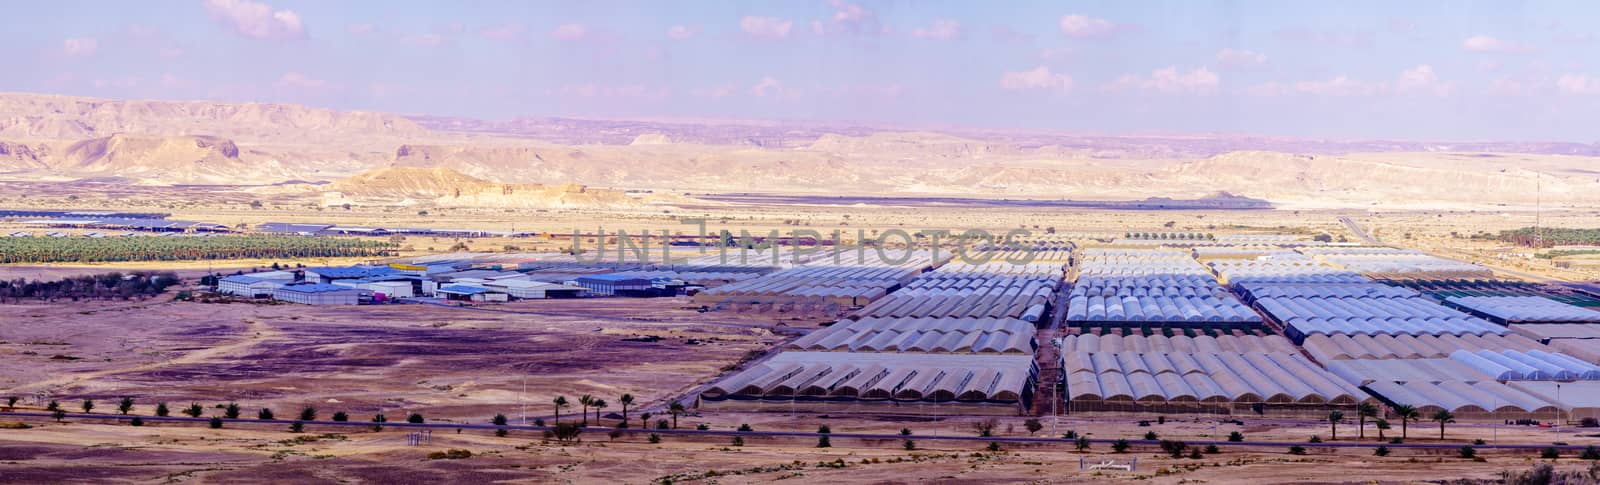 Panoramic view of countryside and desert landscape in Moshav Paran, the Arava desert, southern Israel